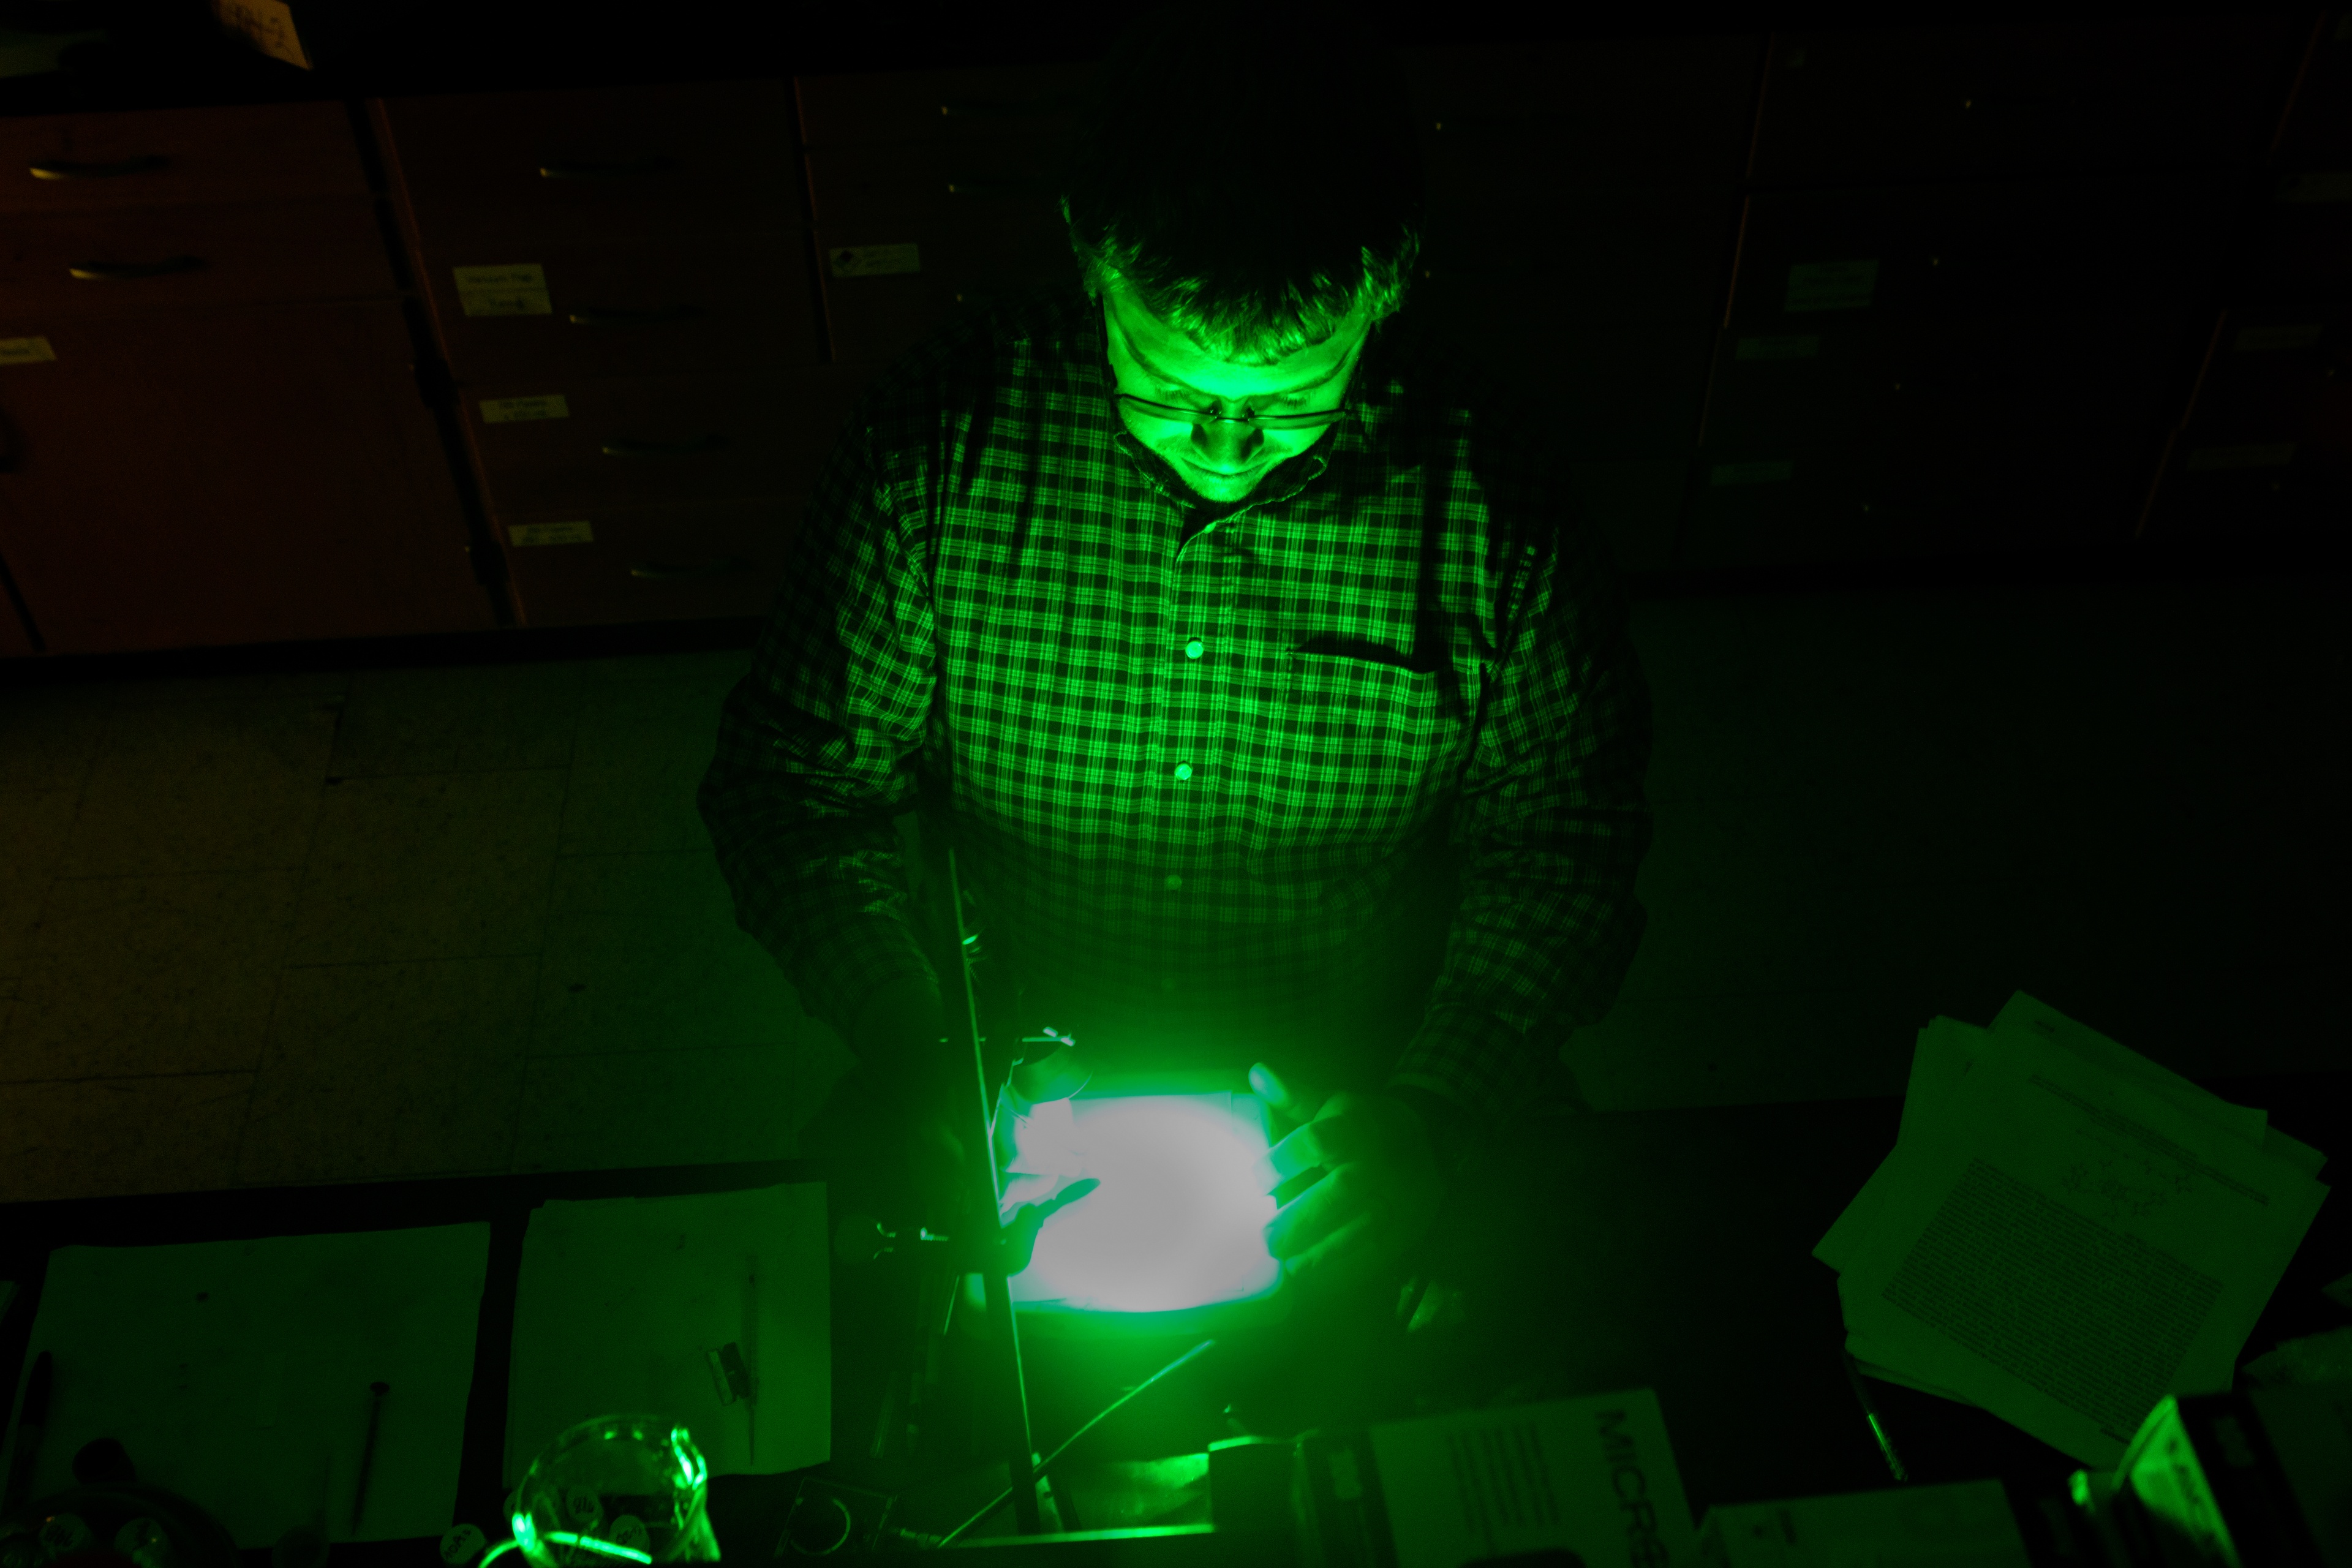 Faculty member in photochemistry lab bathed in greenish light